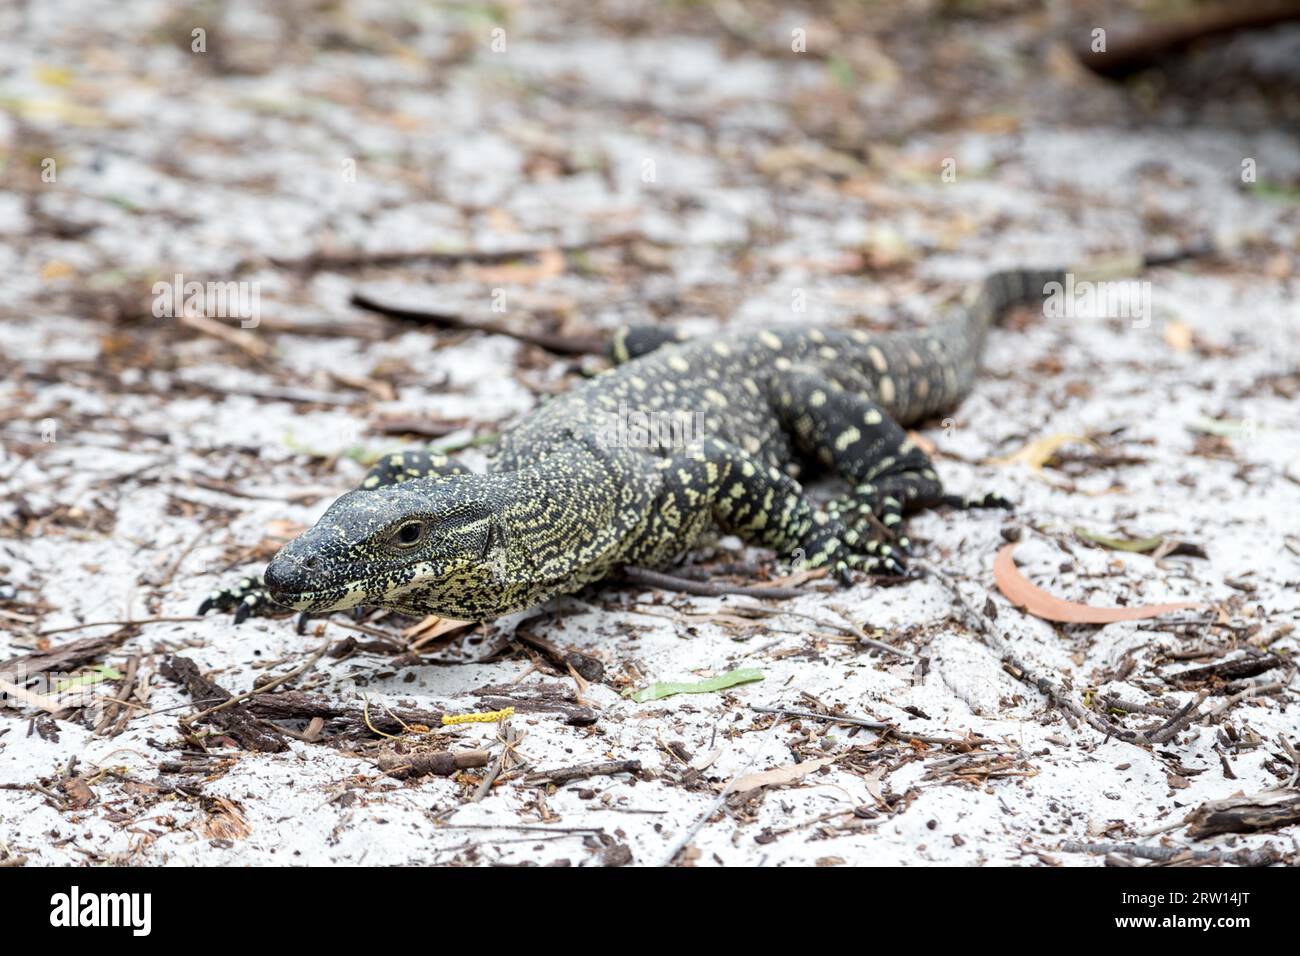 A large monitor lizard at Whithaven Beach on the Whitsunday Islands in Queensland, Australia Stock Photo